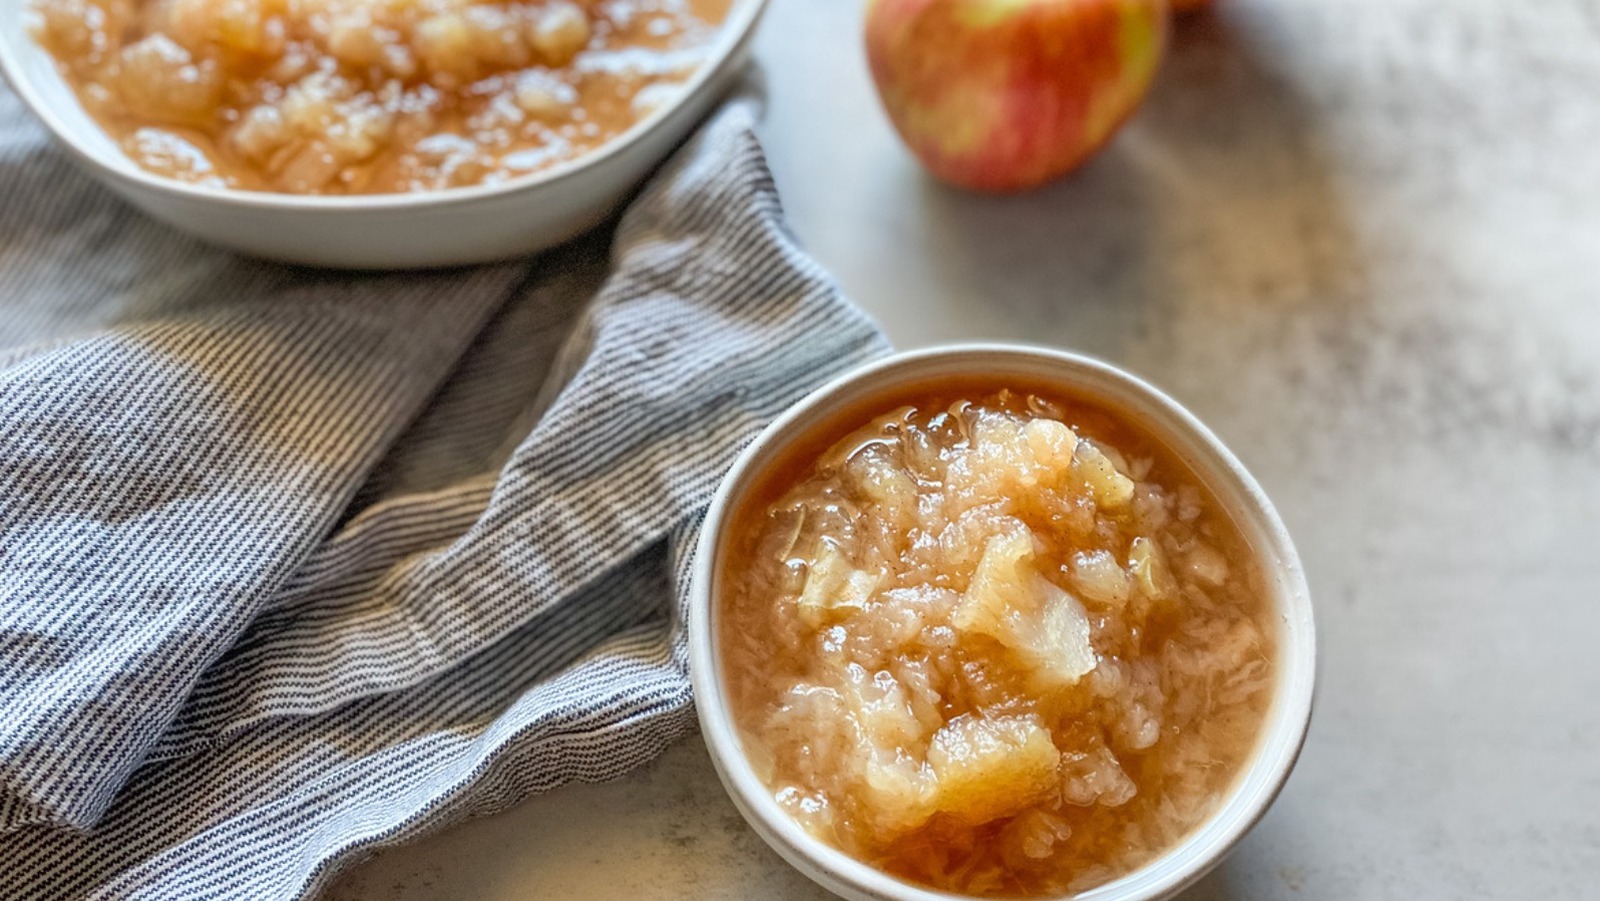 https://www.mashed.com/img/gallery/homemade-instant-pot-applesauce-recipe/l-intro-1630435402.jpg